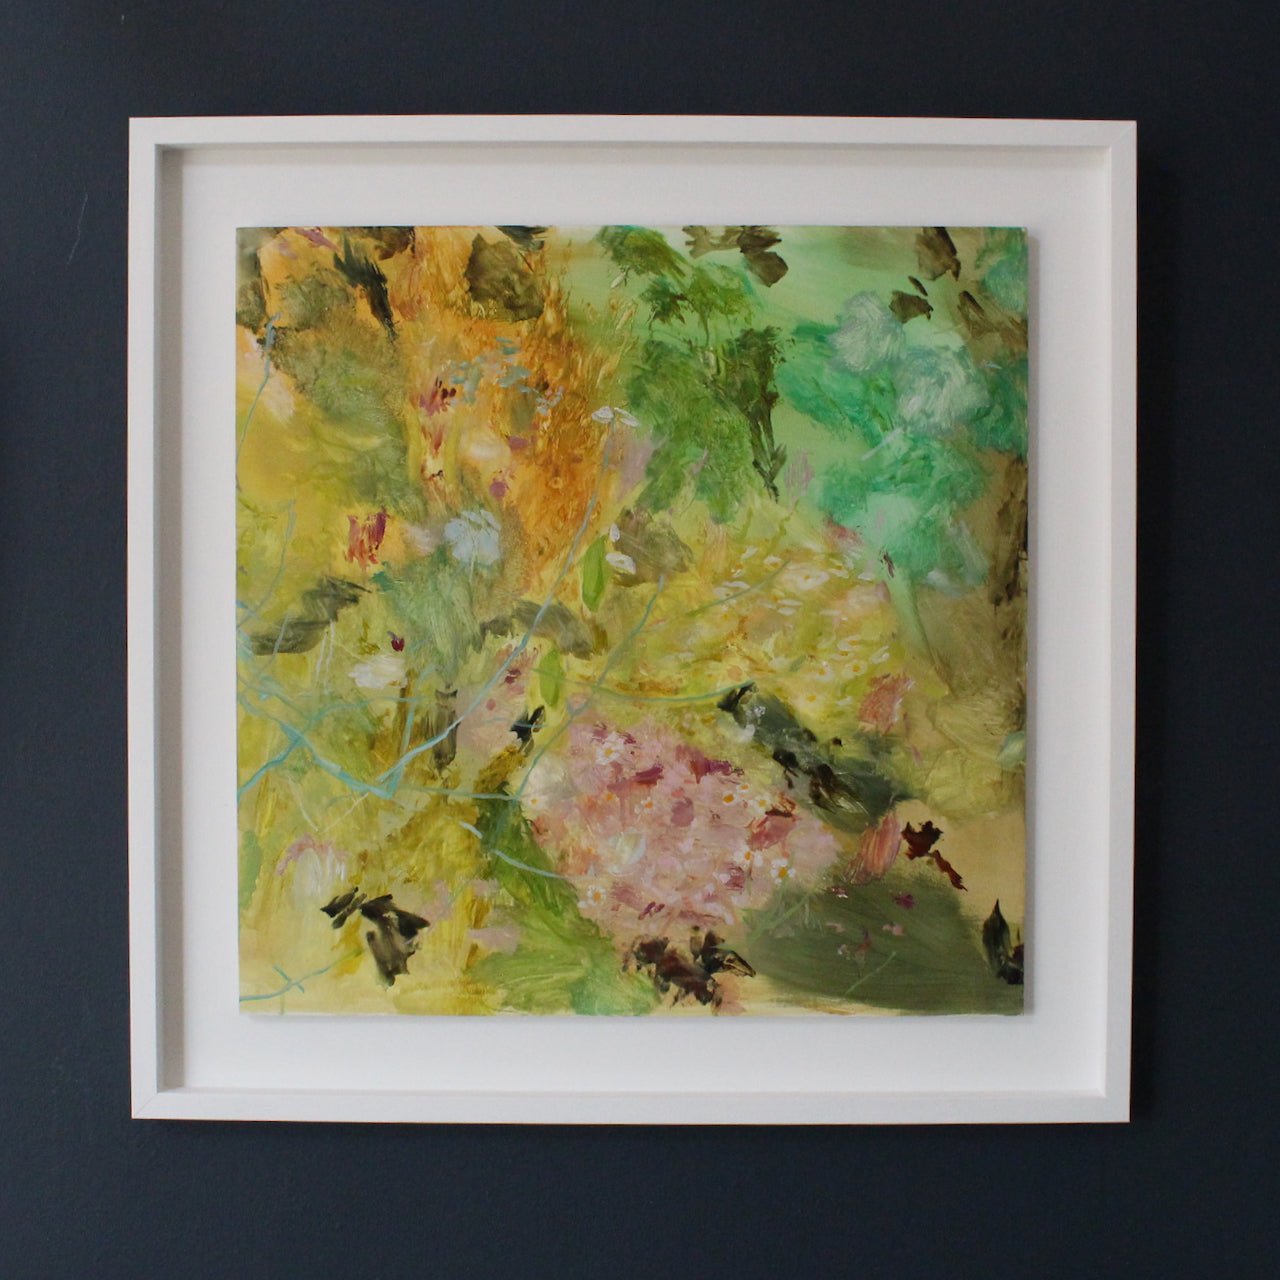 a framed abstract painting in yellow, greens and pink by artist Katy Brown of a garden of flowers it is called Amongst the Starflowers.